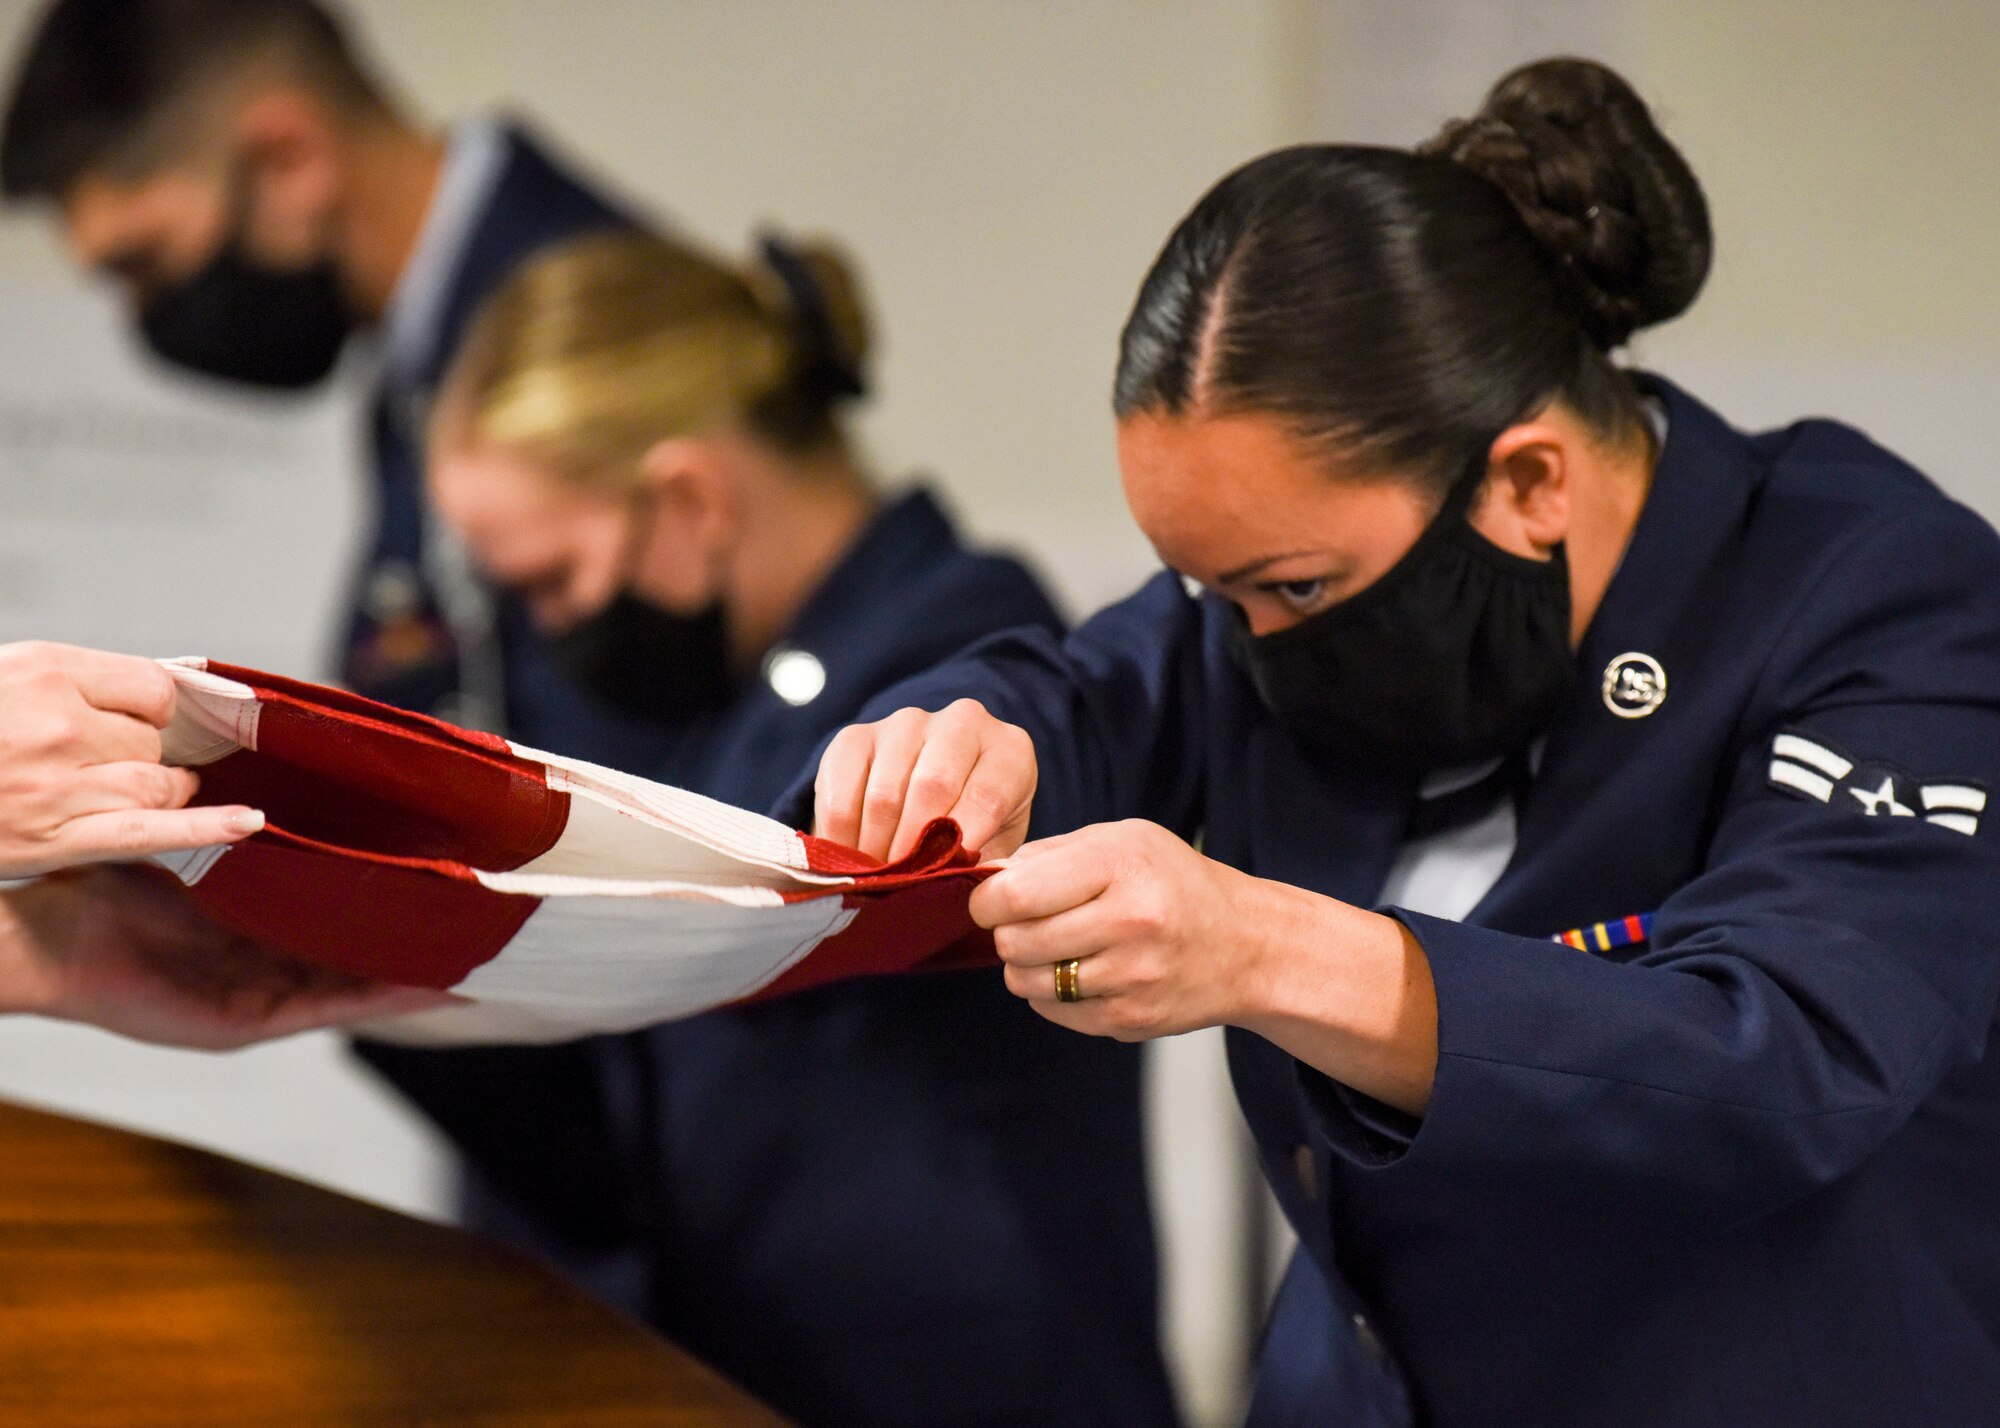 U.S. Air Force Staff Sgt. Kara Tierney and Airman 1st Class Fuatapu Hook ceremonial guardsmen with the Joint Base Elmendorf-Richardson Honor Guard, fold a U.S. flag during a six-man funeral sequence during an Honor Guard graduation ceremony at Joint Base Elmendorf-Richardson, Alaska, Aug. 26, 2020. The primary mission of the base Honor Guard program is to employ, equip and train Air Force members to provide professional military funeral honors for active duty members, retirees and veterans. In January of 2000, public law was implemented, providing all veterans the right to a funeral ceremony that includes, at minimum, the folding of a U.S. flag, presentation of the flag to the veteran’s family and the playing of “Taps.” (U.S. Air Force photo by Senior Airman Crystal A. Jenkins)